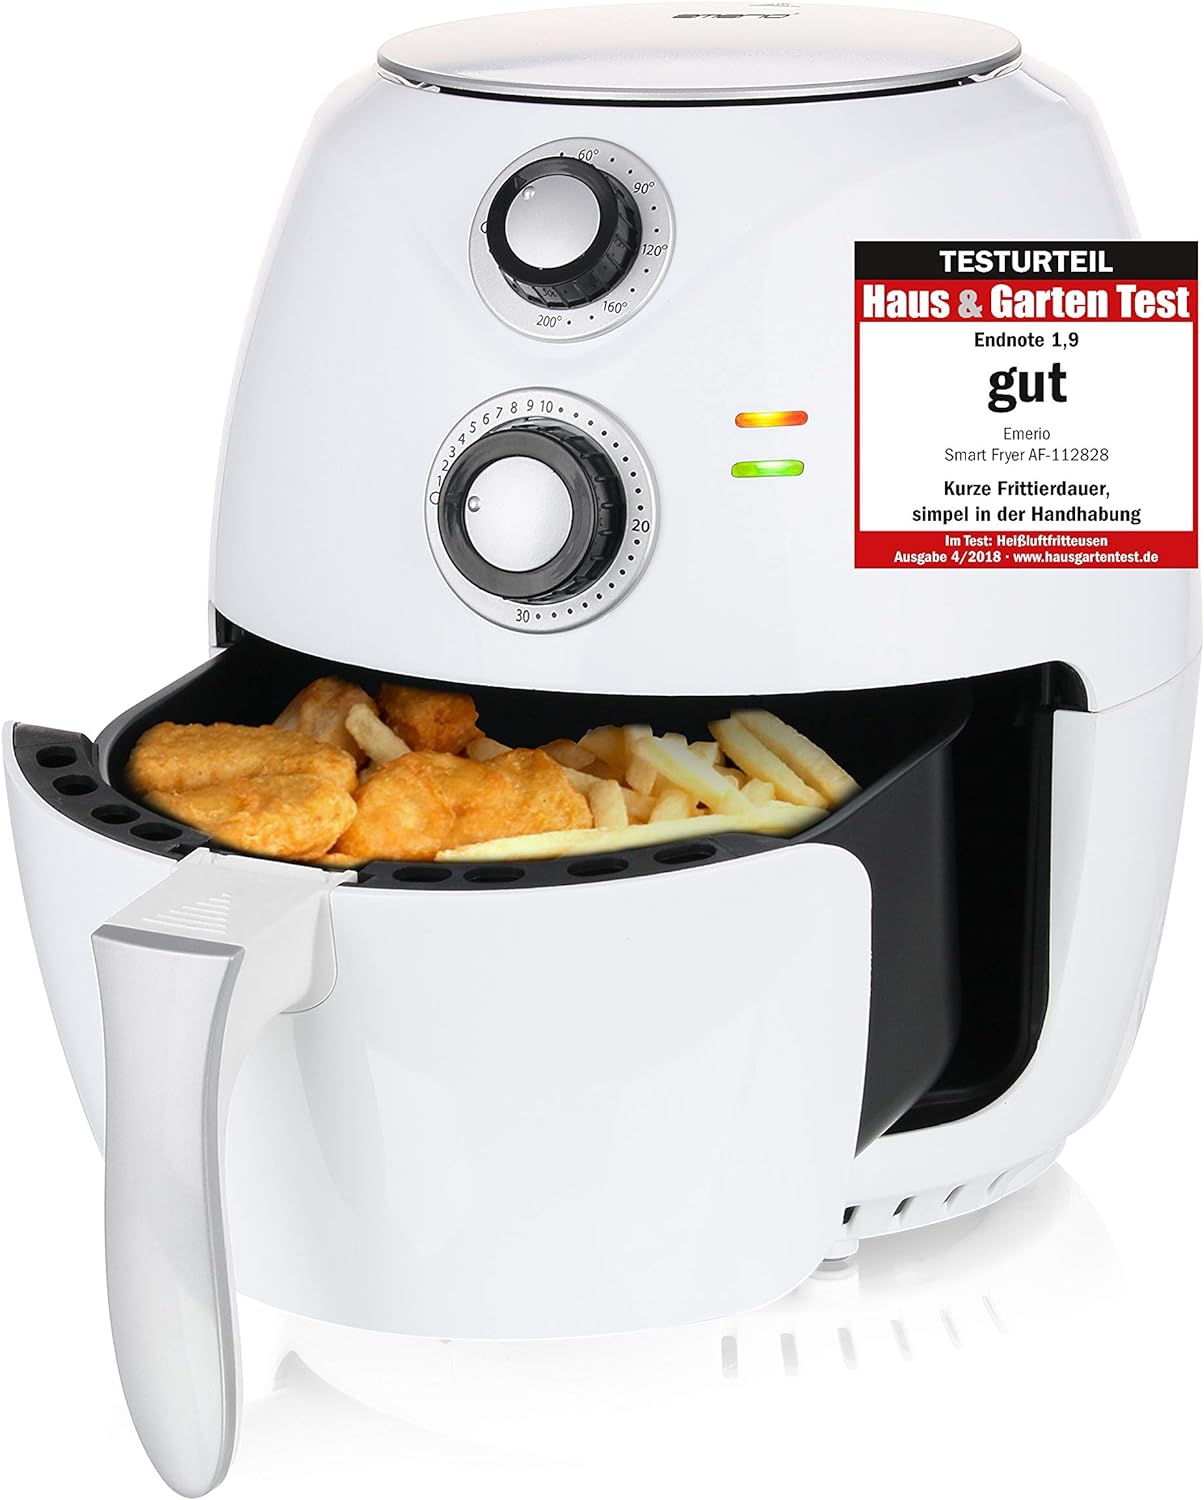 Emerio Hot Air Fryer, Airfryer, Smart Fryer for Frying Without Oil, Test Gut